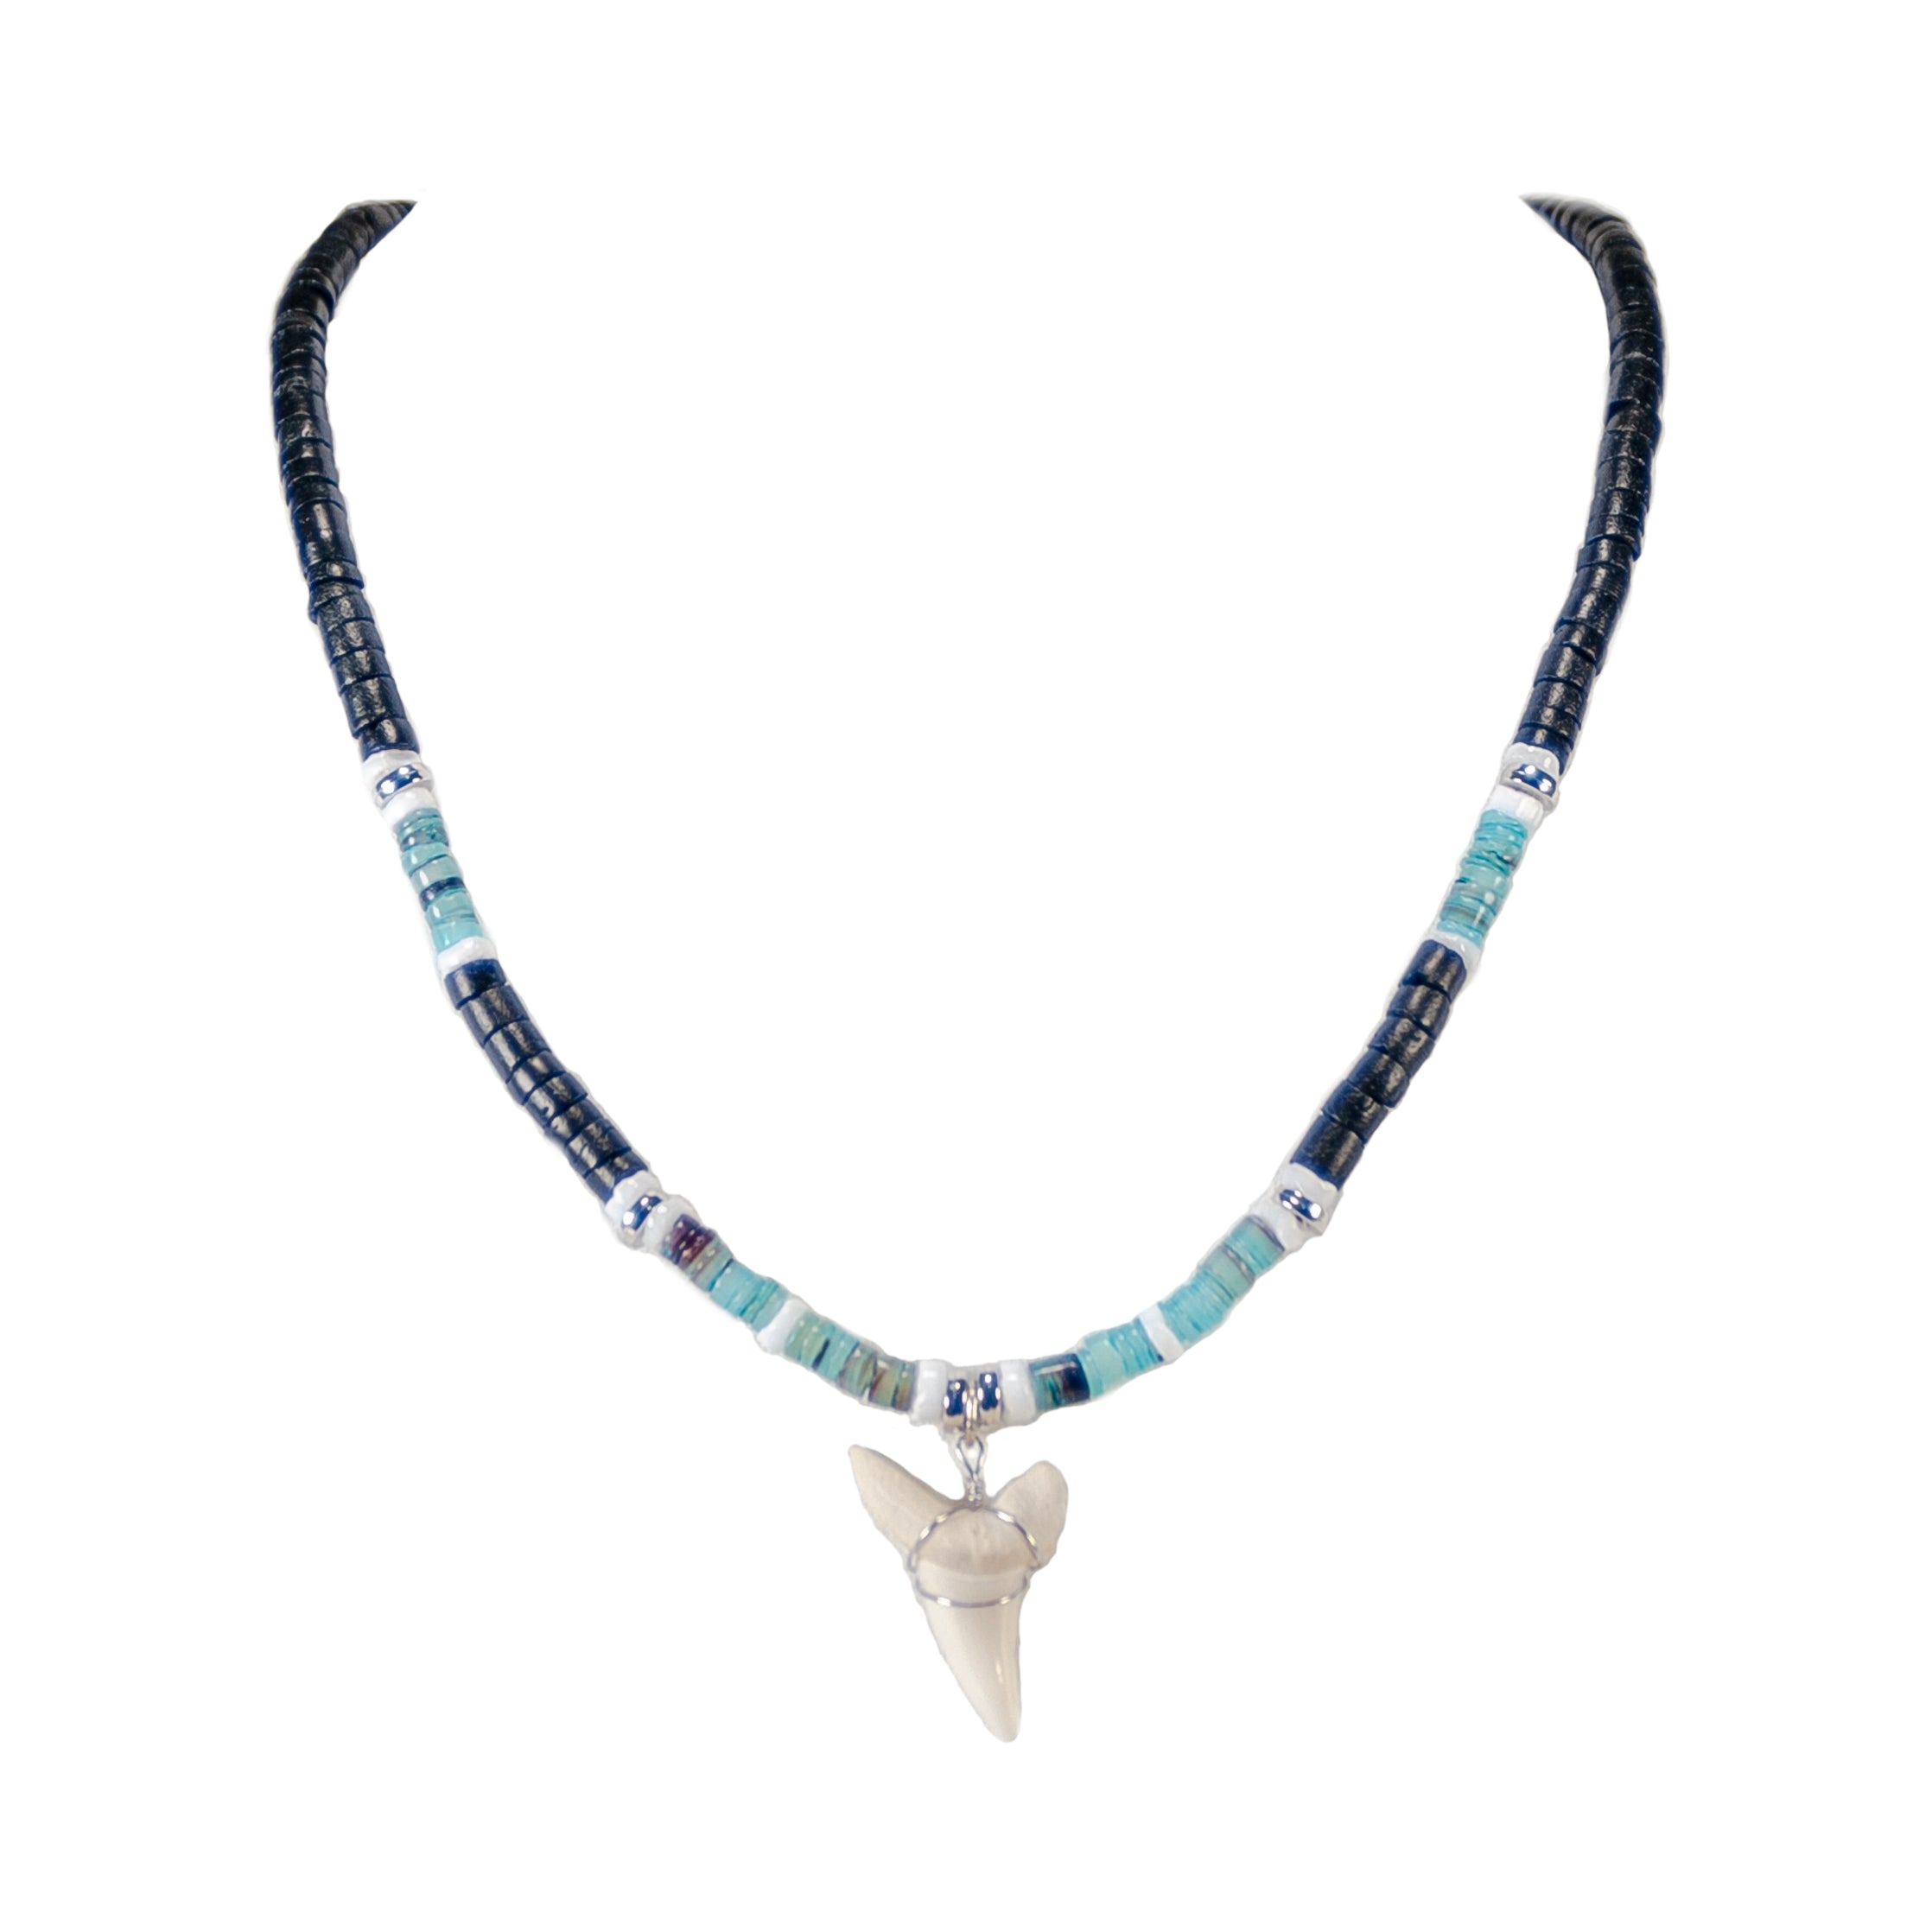 Mako Shark Tooth Pendant on Black Coconut & Green Shell Beads Necklace